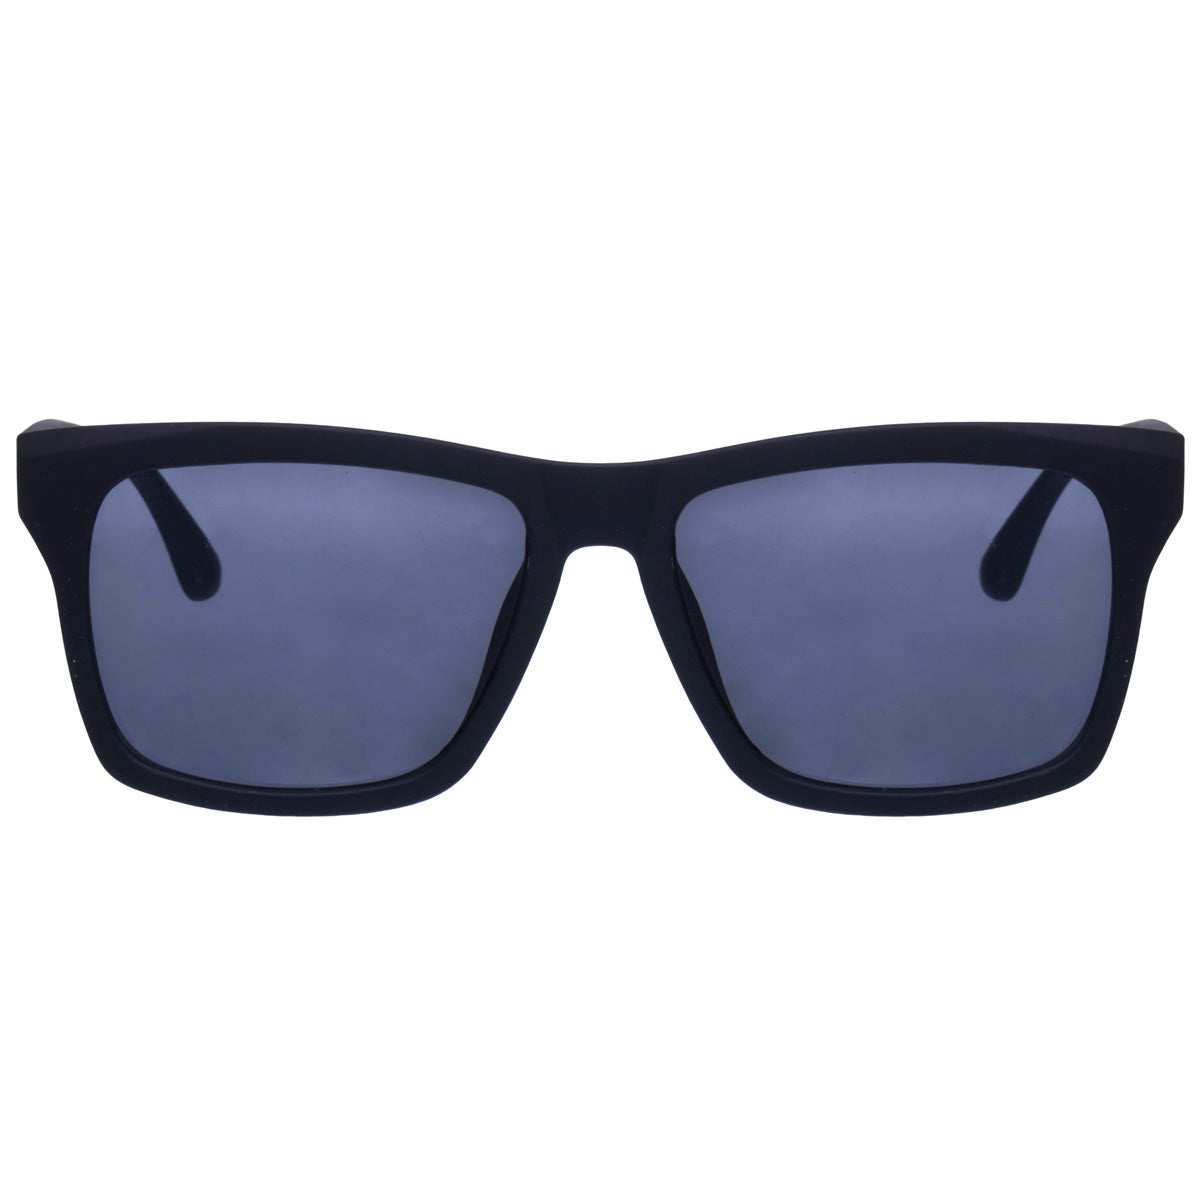 Classic sunglasses with decorative buckles